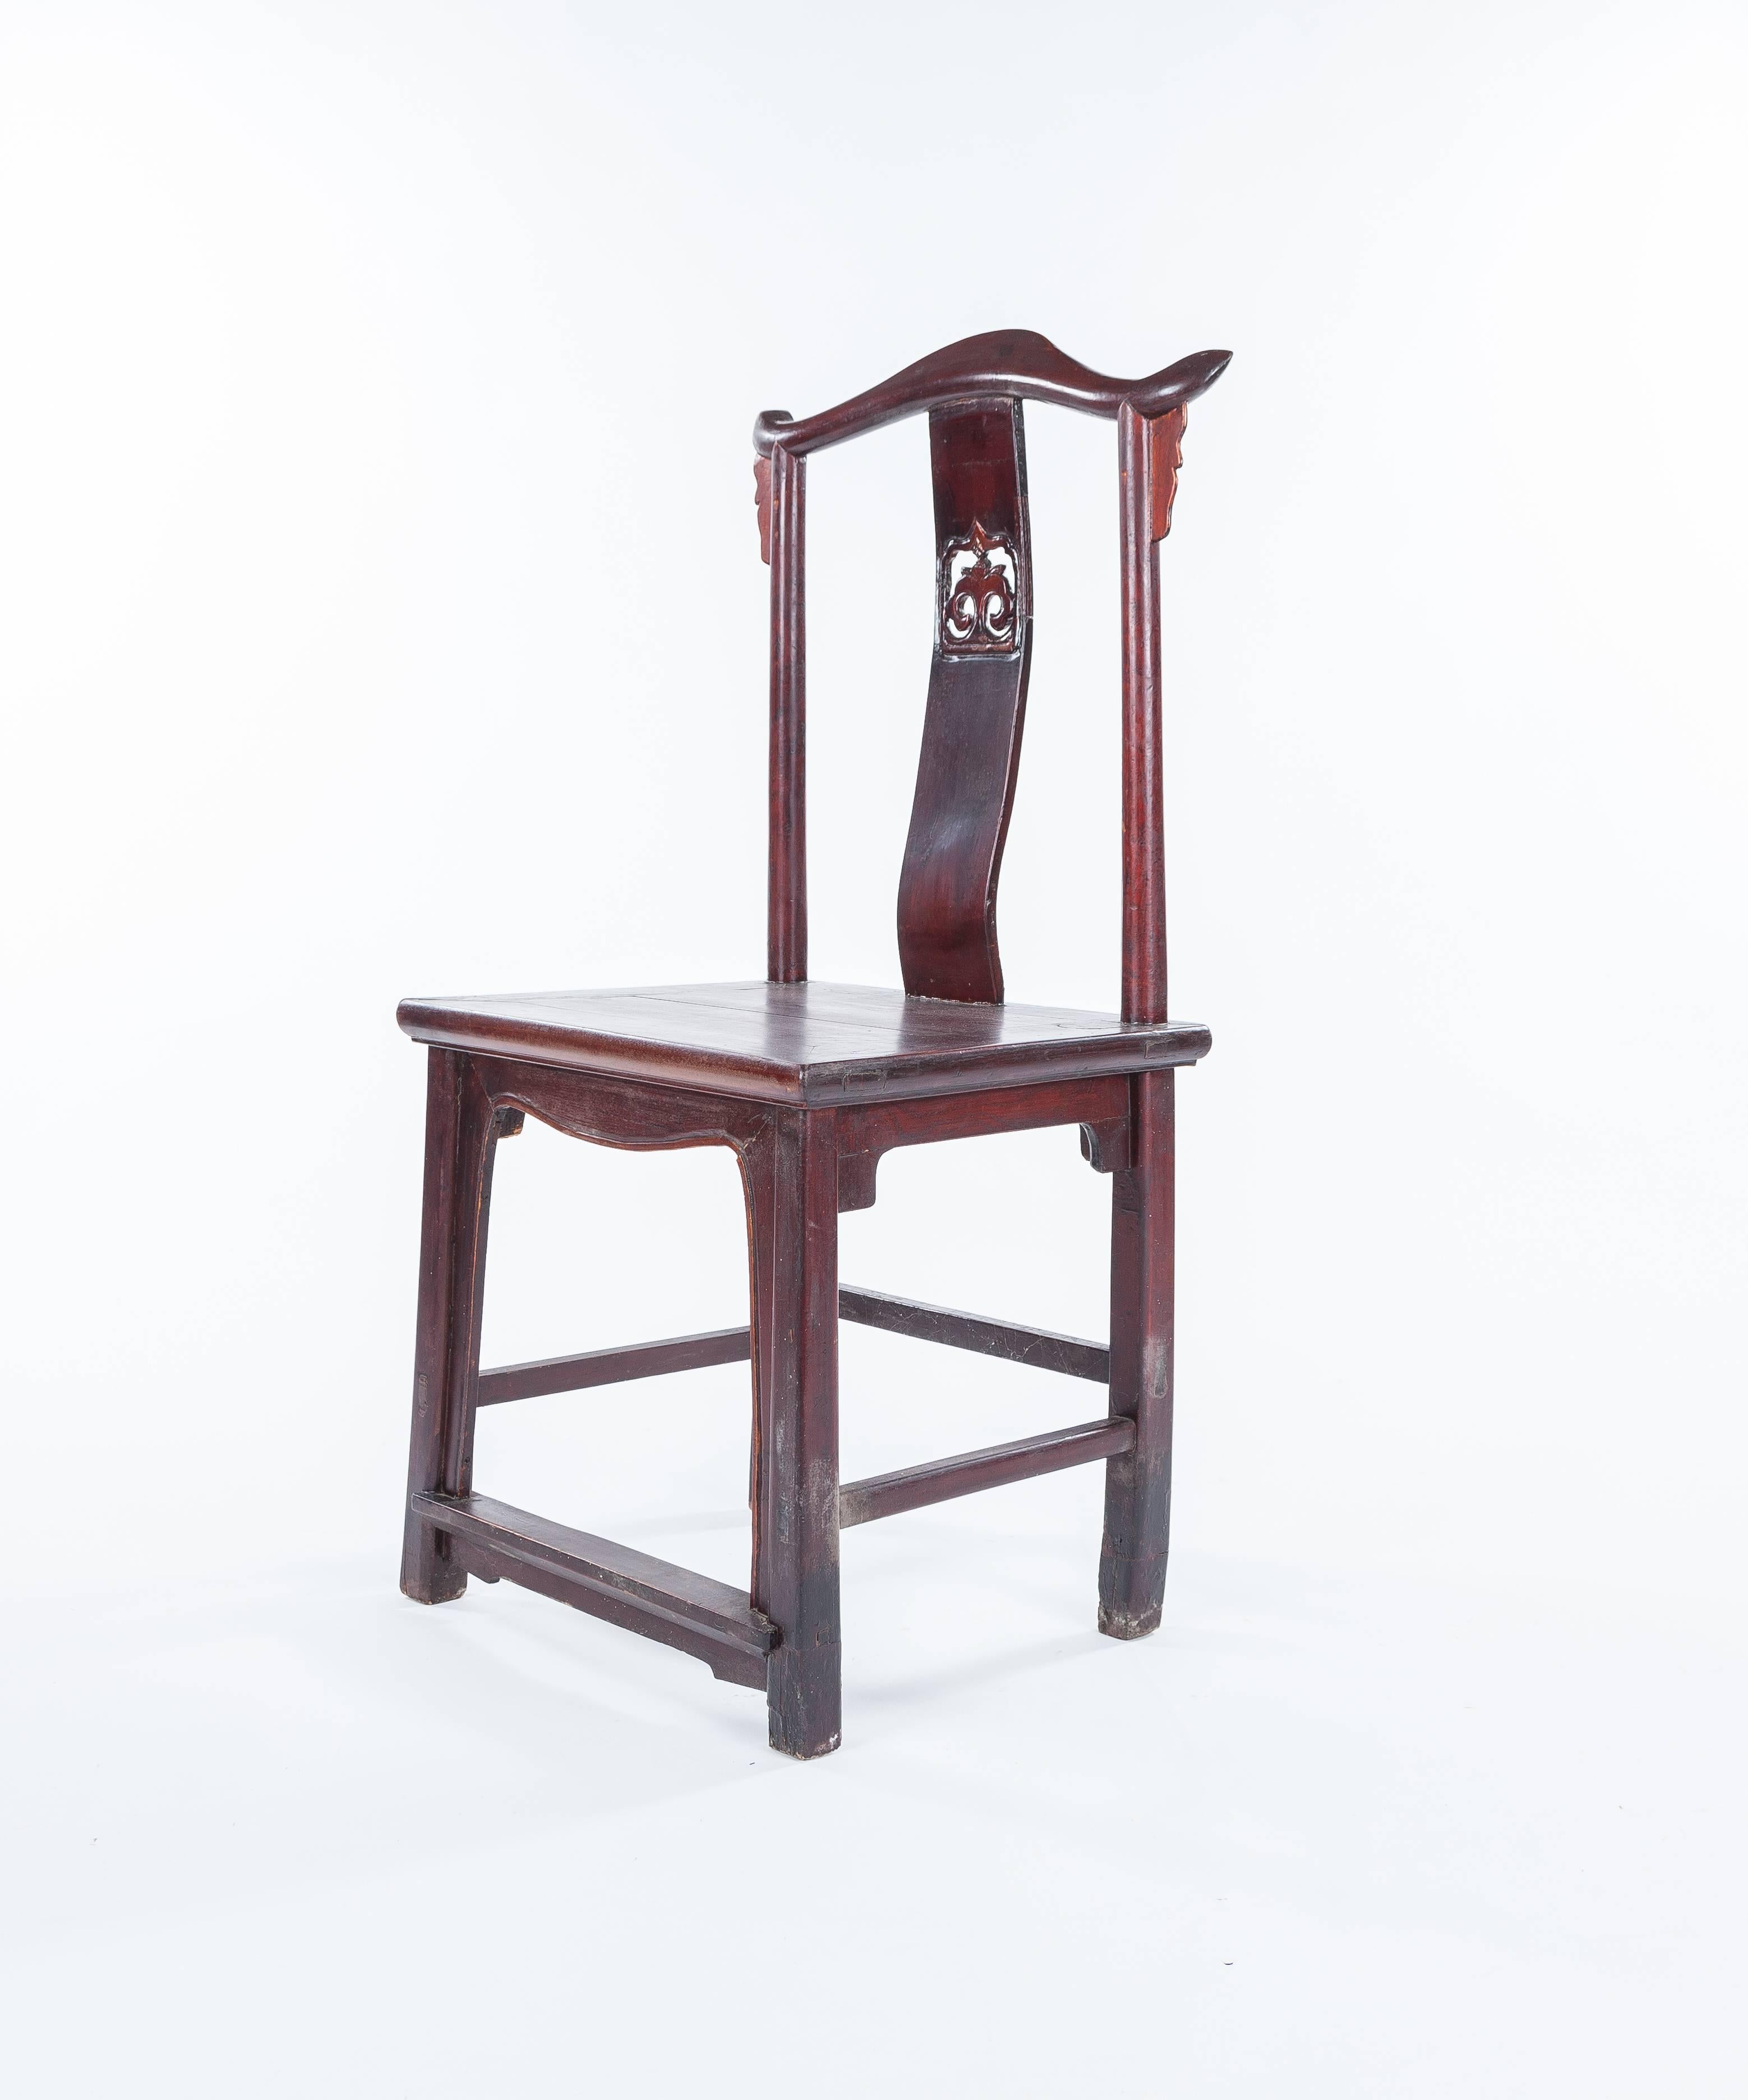 An antique Ming-style Chinese hardwood chair dating to the late 19th century. The chair measures approximately 21